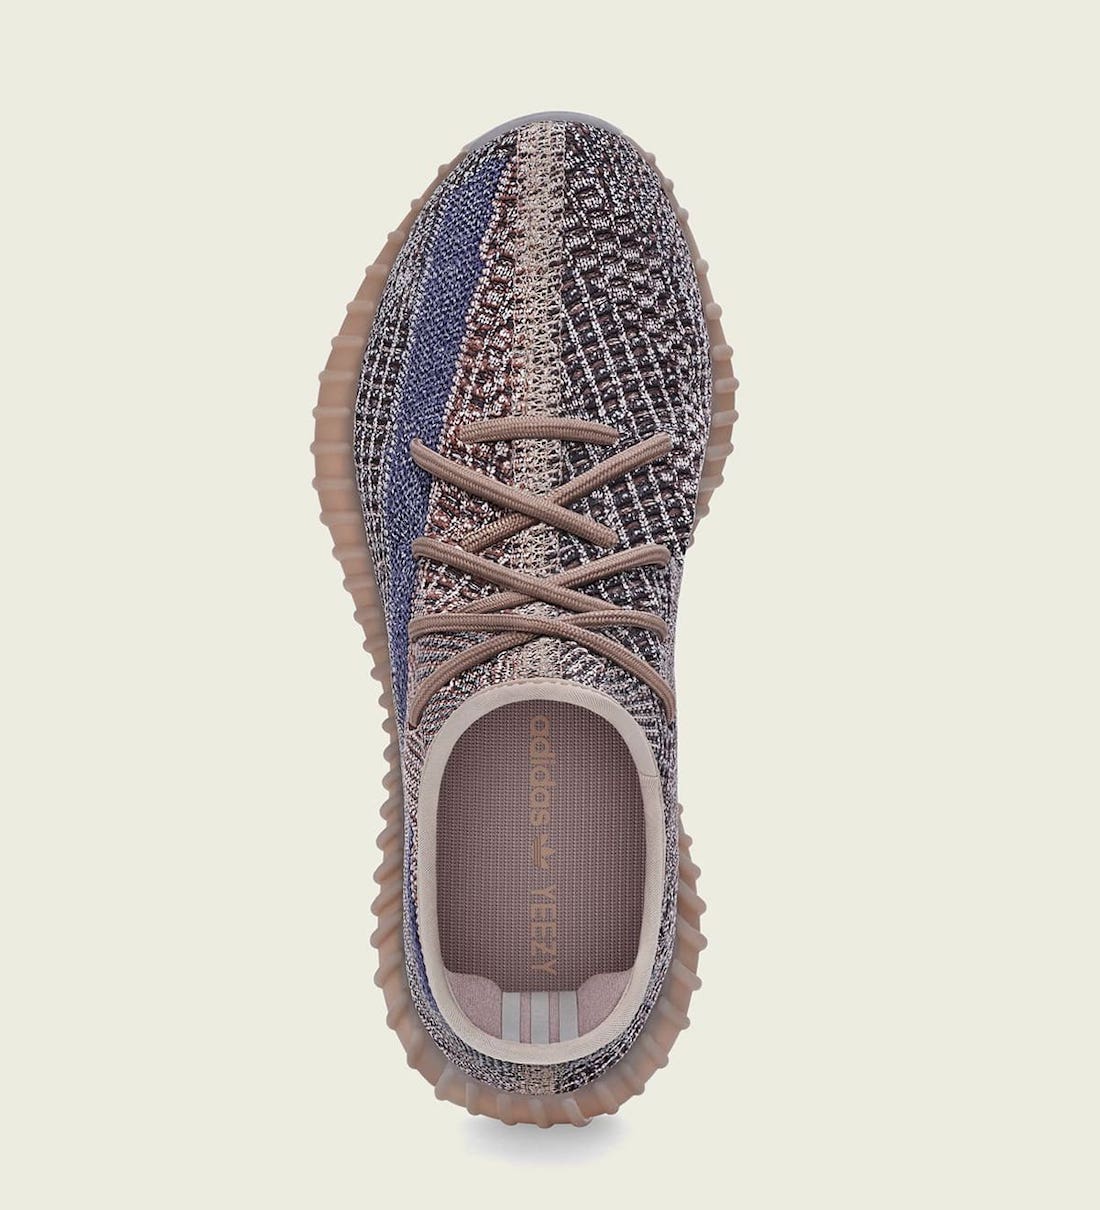 adidas-Yeezy-Boost-350-V2-Fade-H02795-Release-Date-Price-3